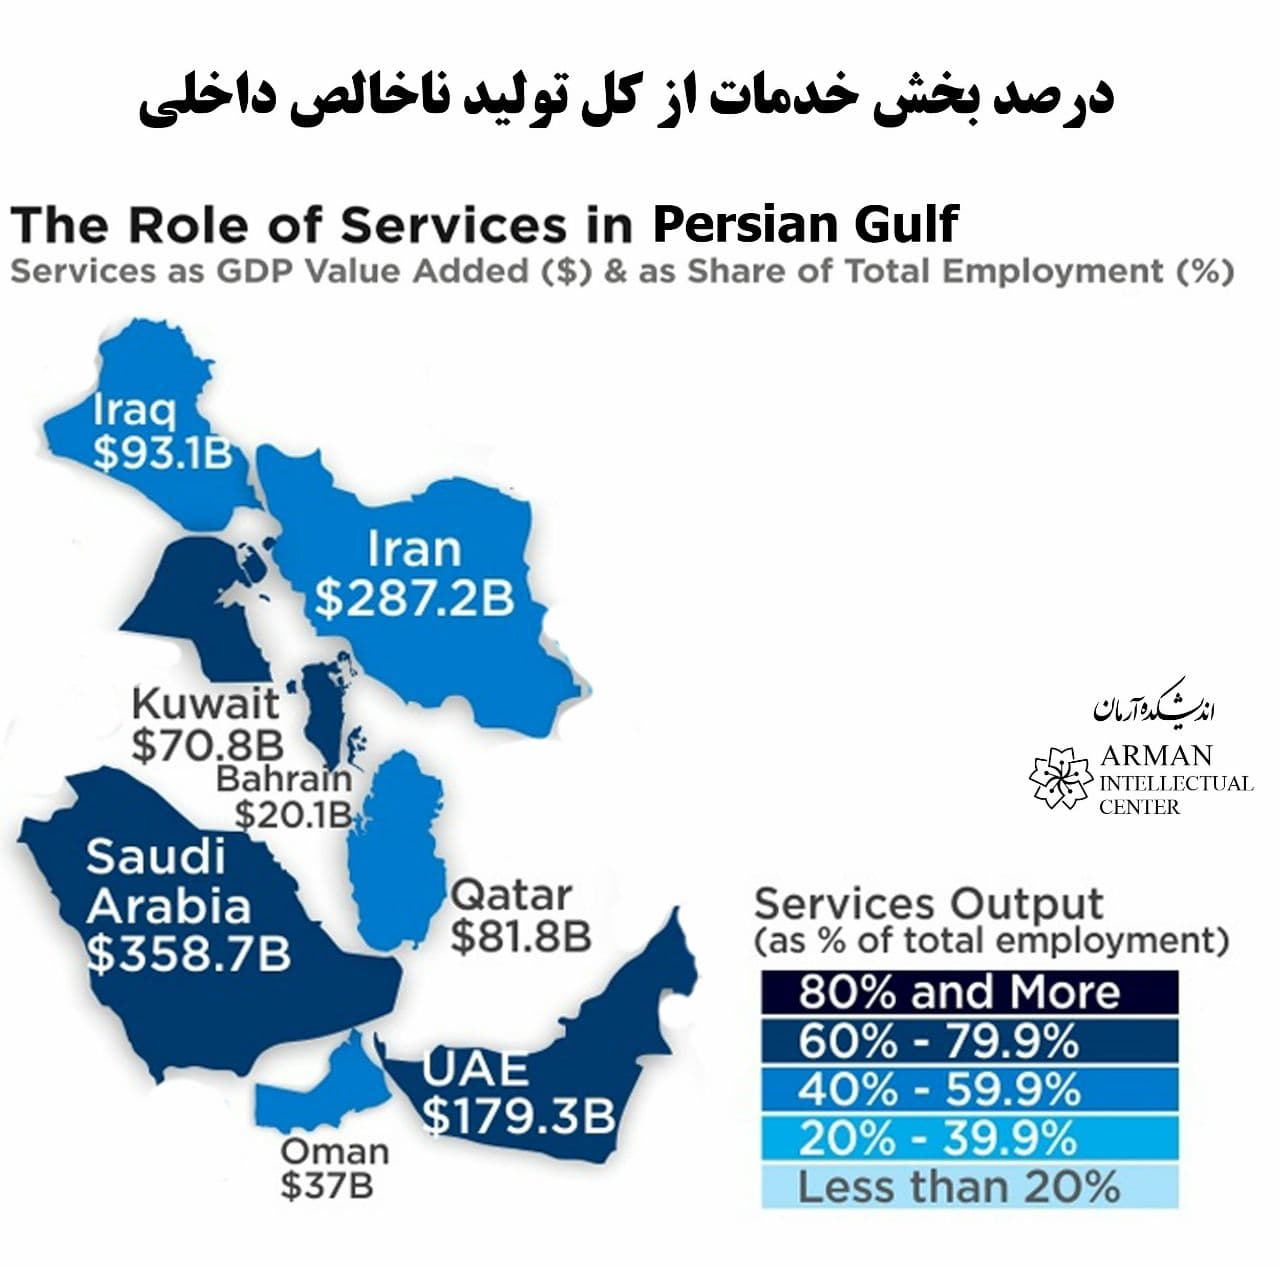 PersianGulf Role Services GDP